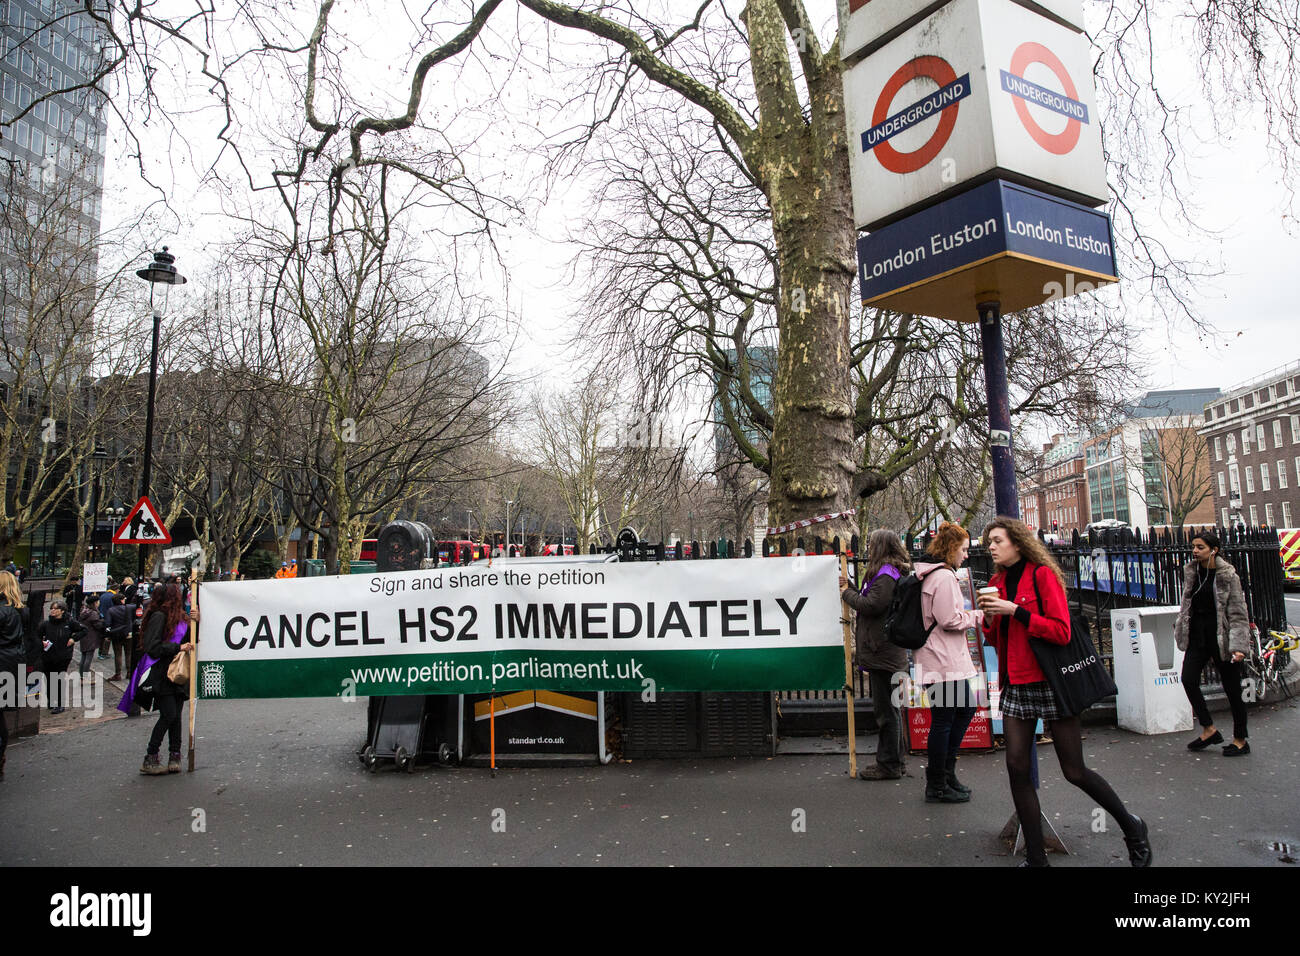 London, UK. 12th January, 2018. Local residents and environmental campaigners protest against the planned felling of mature London Plane, Red Oak, Common Lime, Common Whitebeam and Wild Service trees in Euston Square Gardens to make way for temporary sites for construction vehicles and a displaced taxi rank as part of preparations for the HS2 rail line. Stock Photo